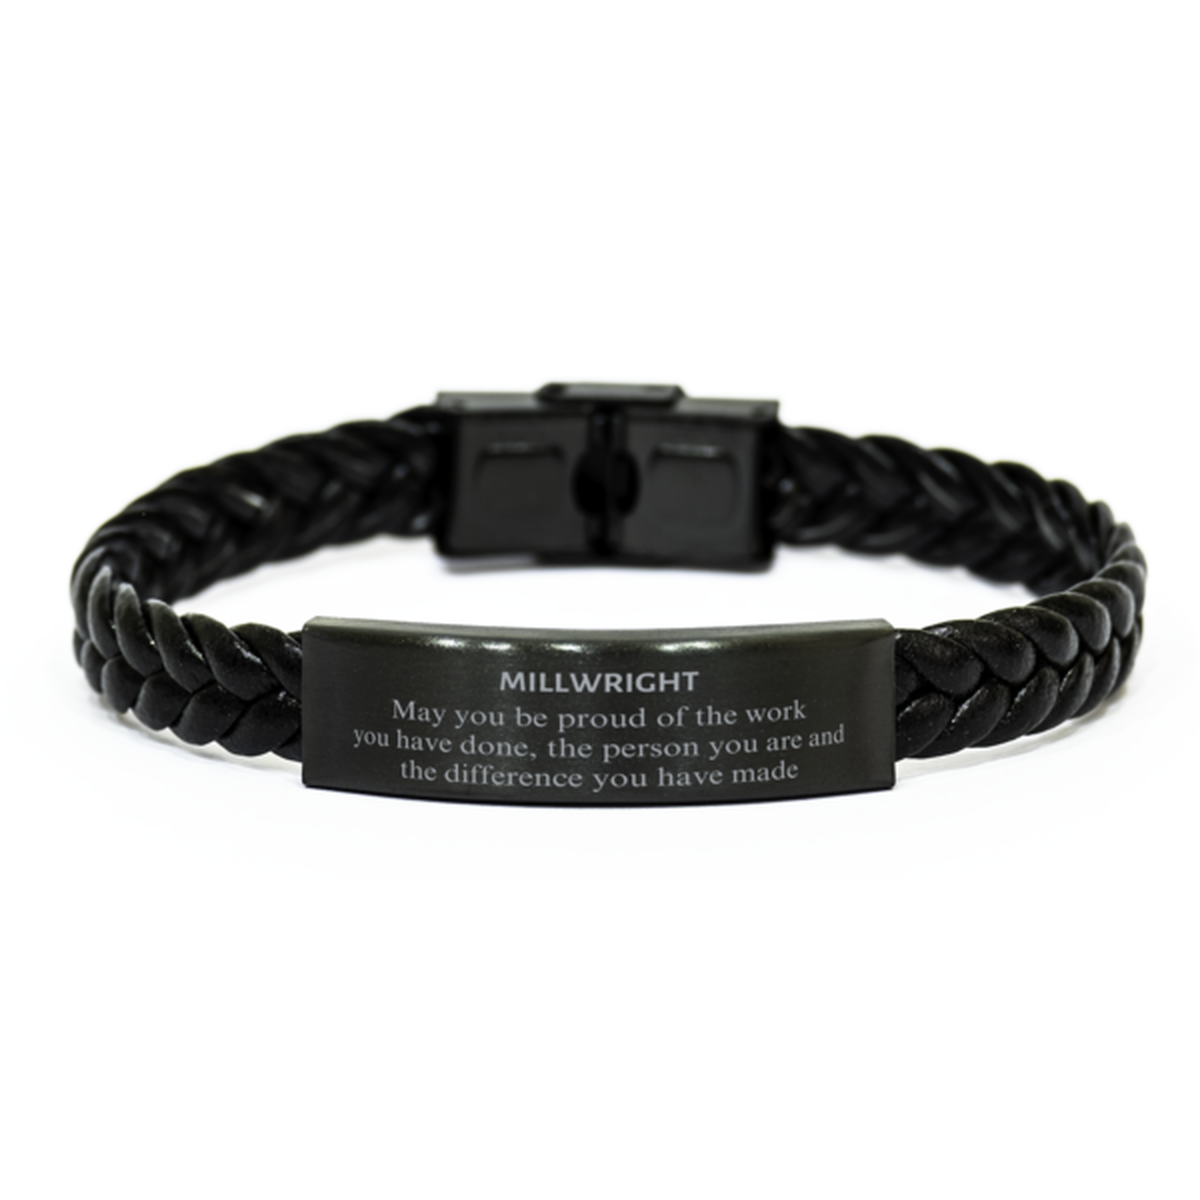 Millwright May you be proud of the work you have done, Retirement Millwright Braided Leather Bracelet for Colleague Appreciation Gifts Amazing for Millwright